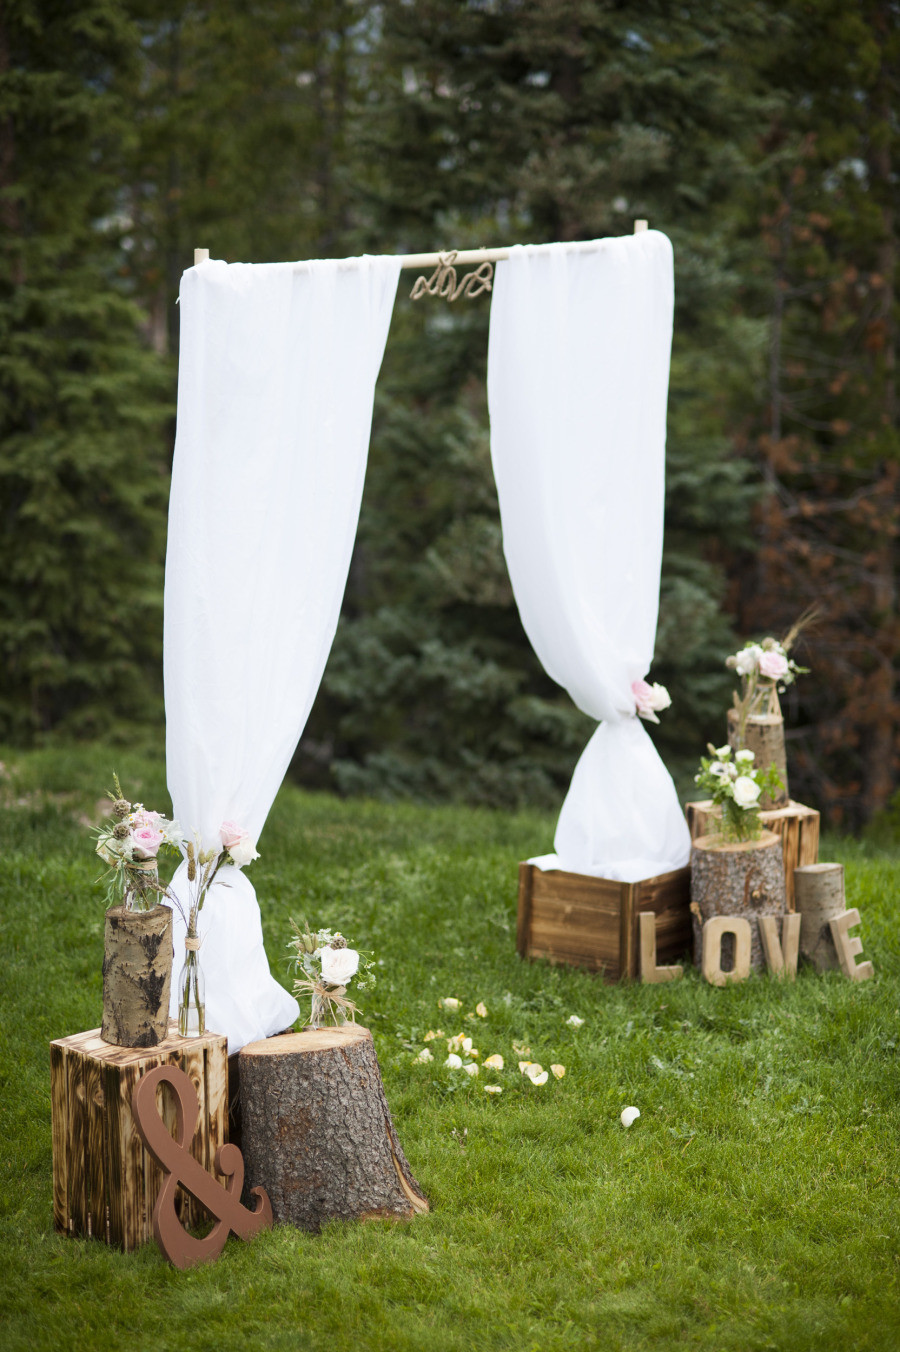 Easy Wedding Decorations
 Say “I Do” to These Fab 51 Rustic Wedding Decorations